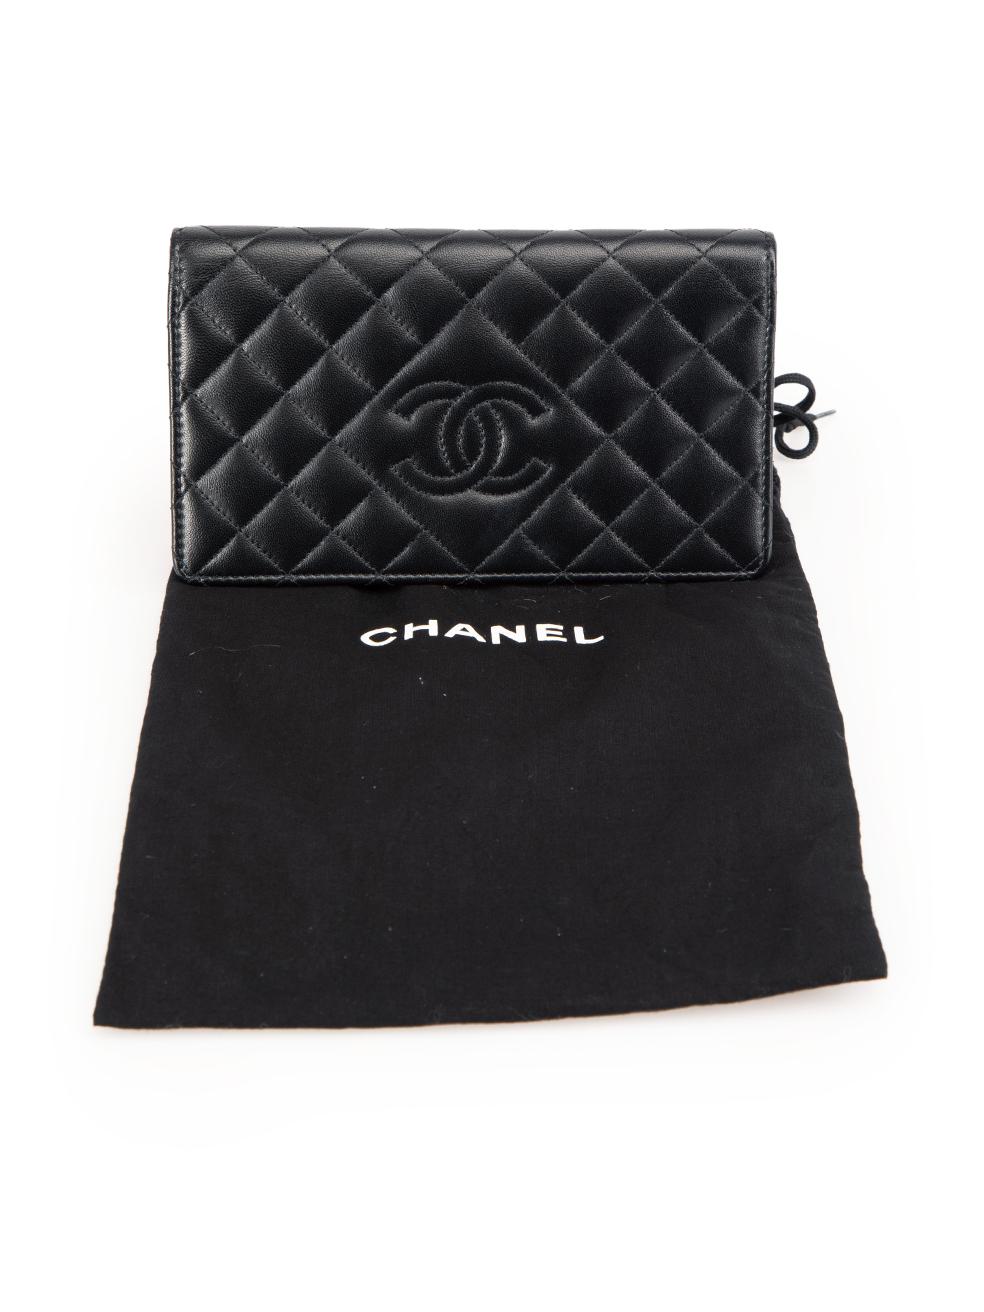 Chanel Black Leather CC Quilted Bilfold Wallet For Sale 3